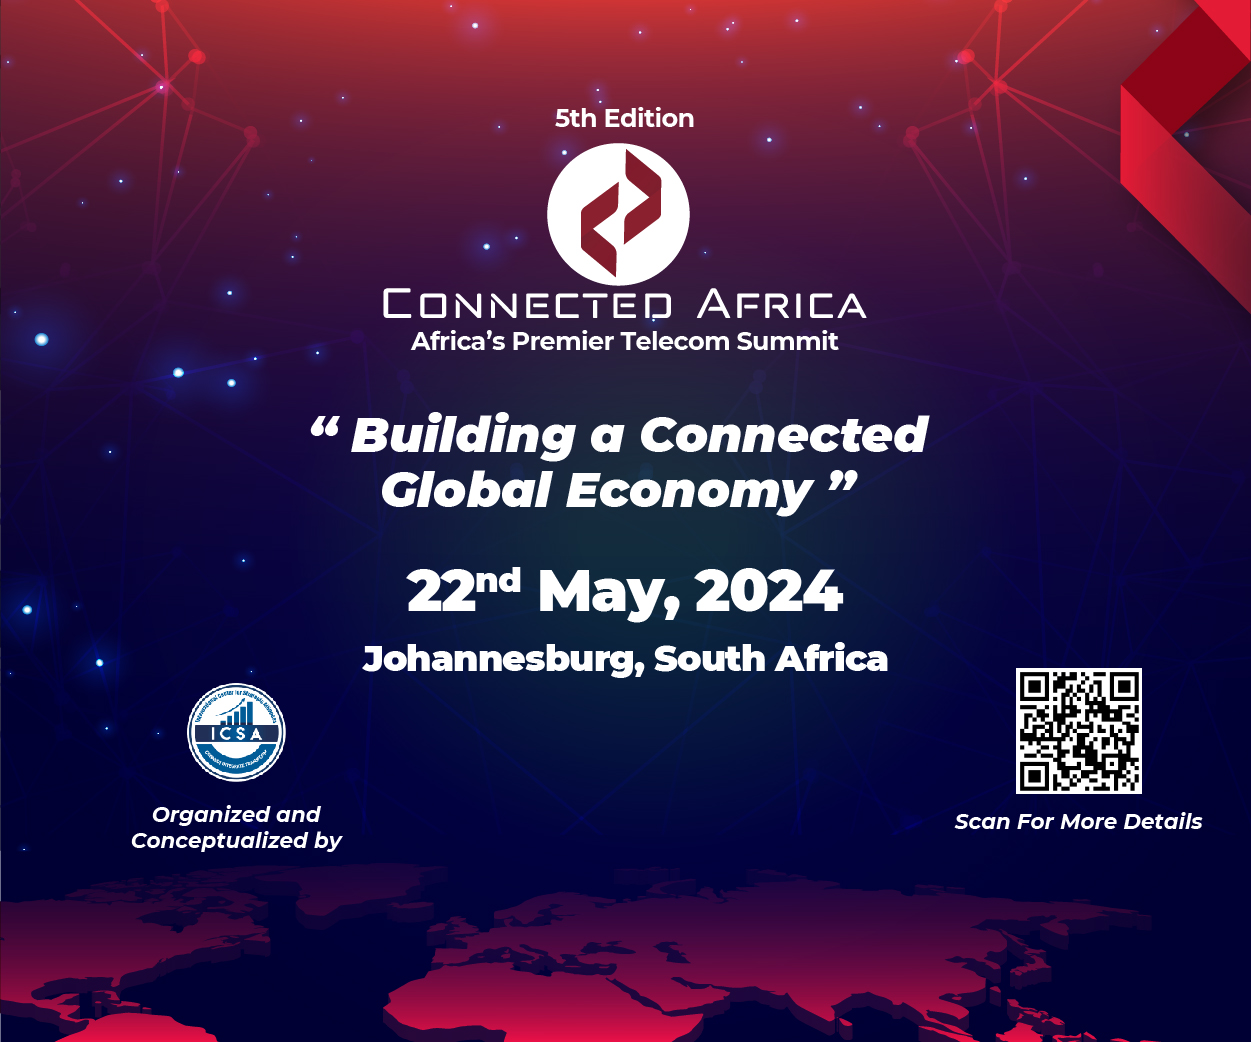 5th Edition Connected Africa- Telecom Innovation & Excellence Awards 2024: Africa's Premier Telecom Summit